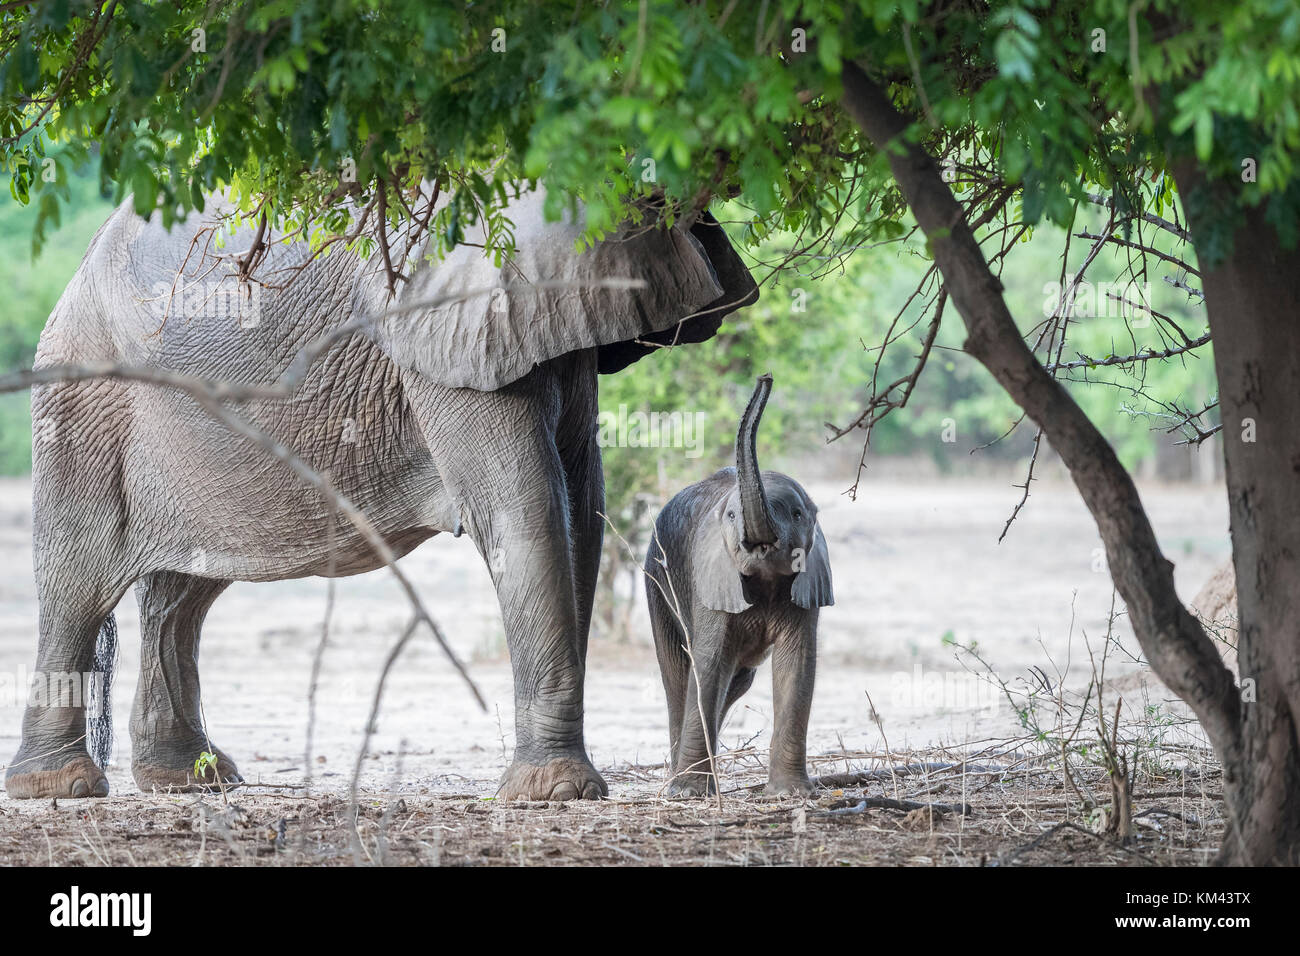 A small baby elephant, close to his mother, lifts his trunk, trying to reach the green leaves to eat, at Mana Pools game reserve, Northern Zimbabwe Stock Photo